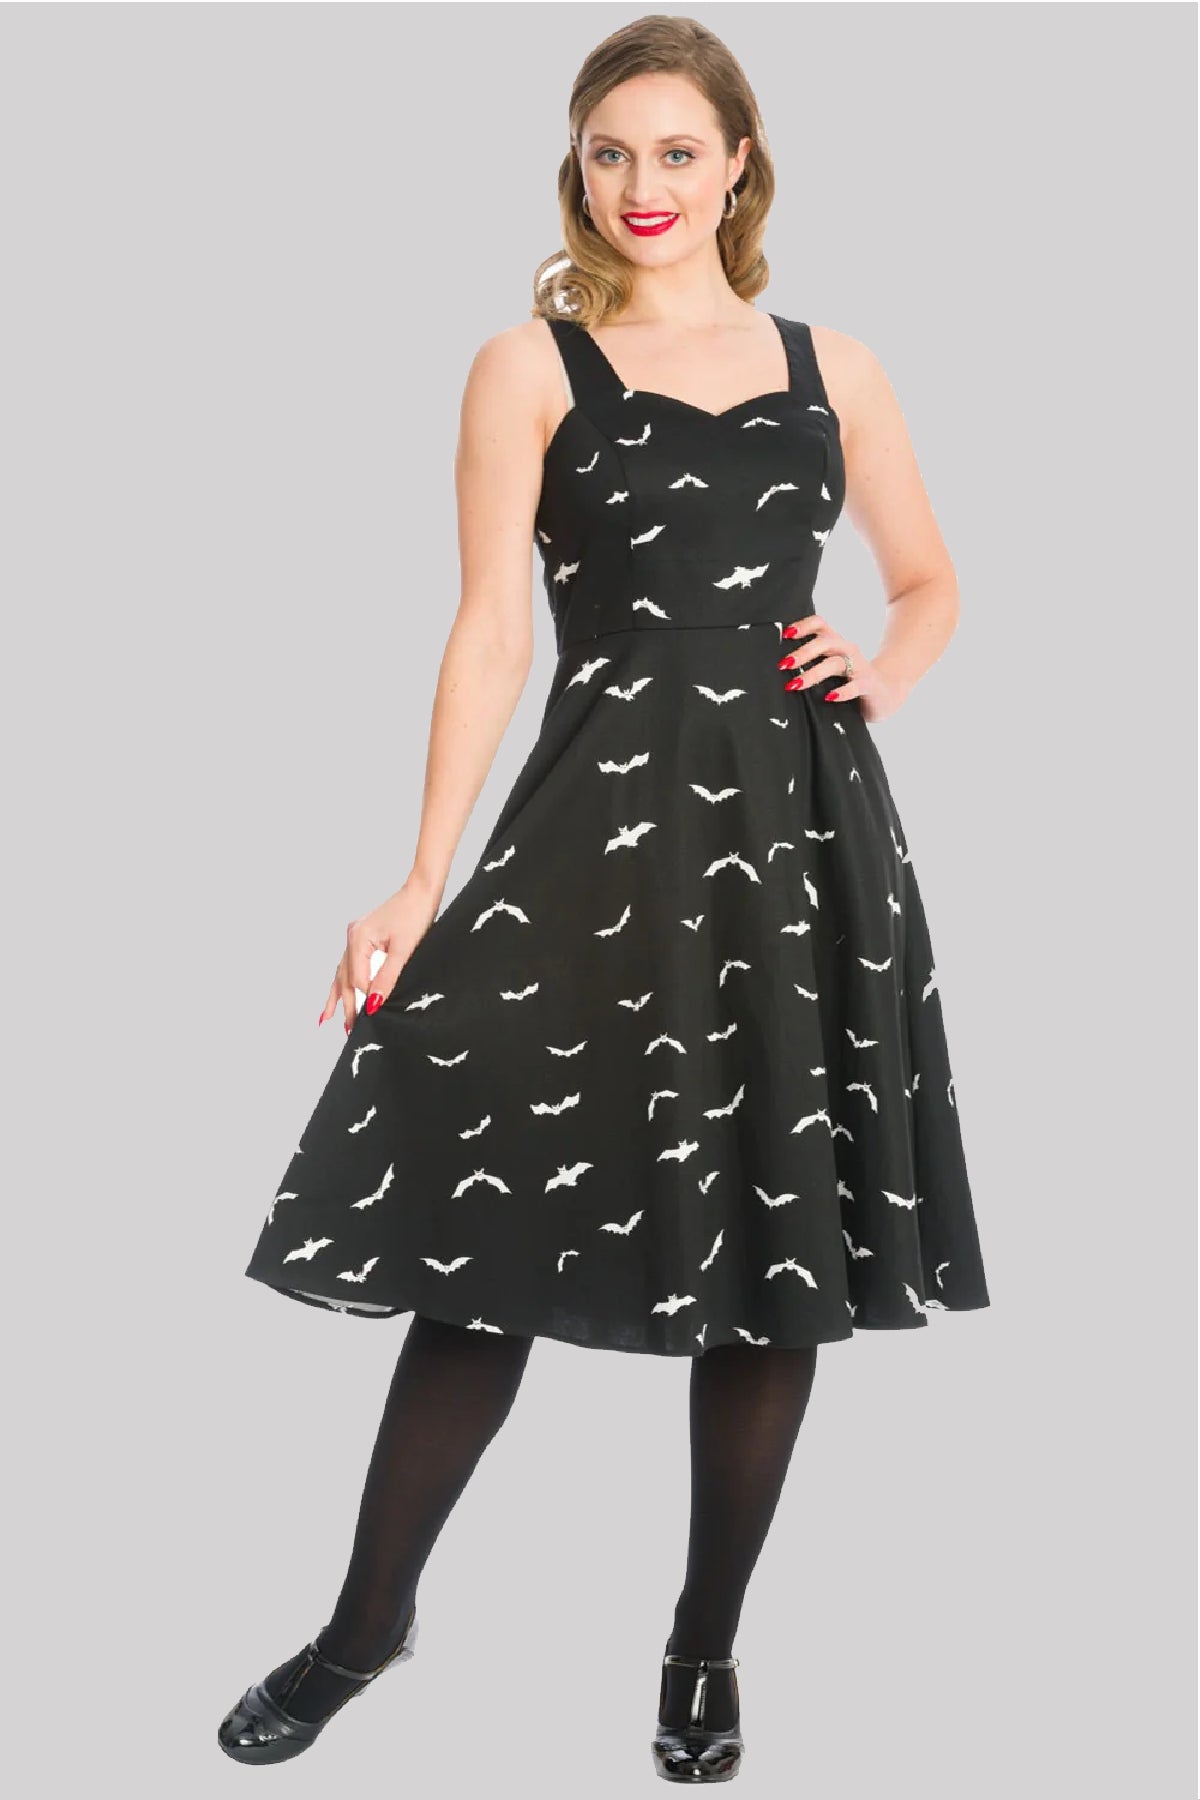 Banned Shes Batty For You Bat Rockabilly Swing Dress